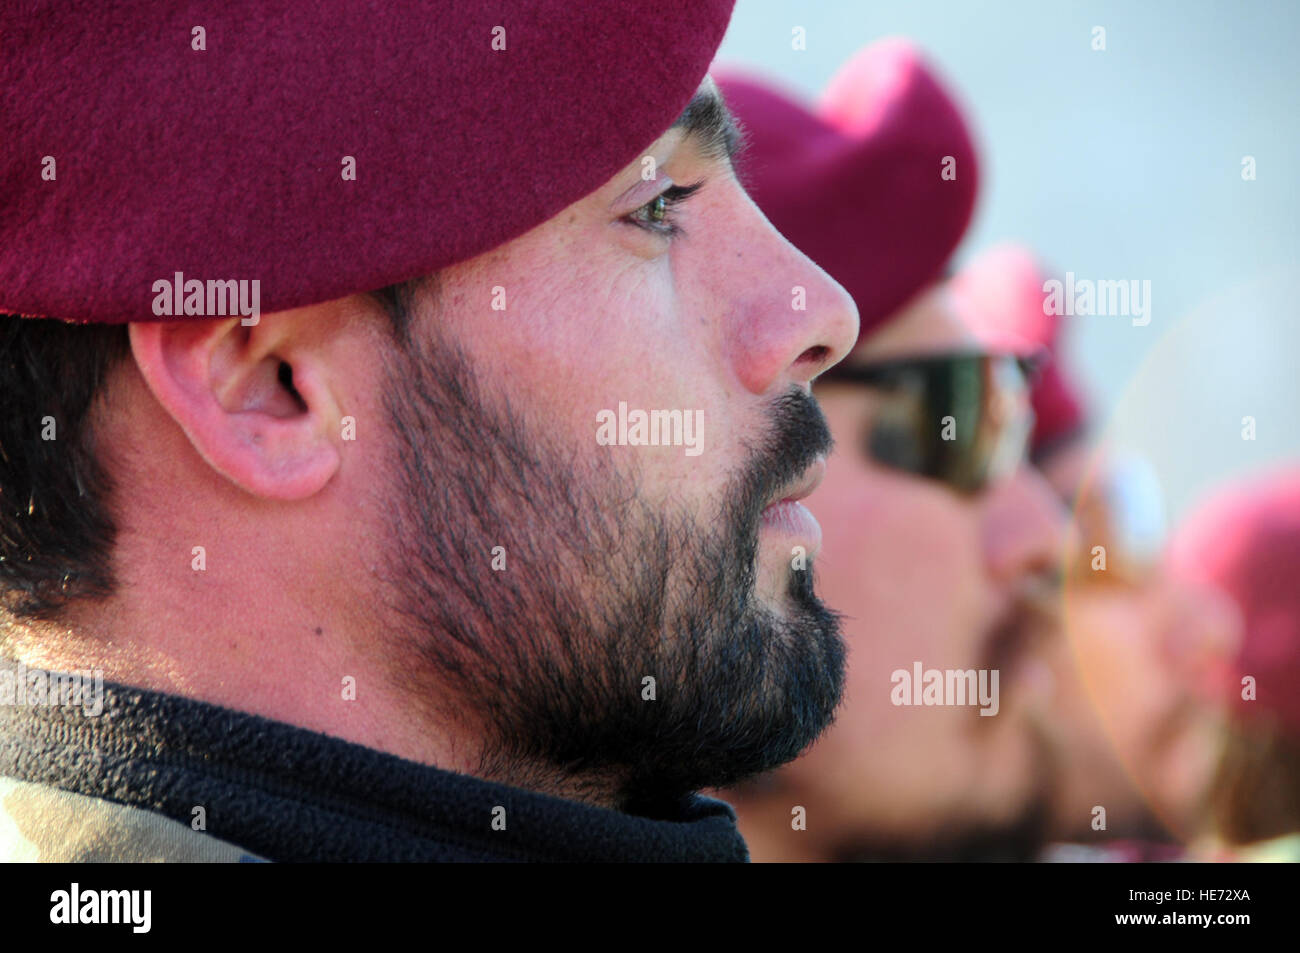 100121-F-1020B-052 Kabul - Afghan National Army commandos proudly display their new red berets during their graduation ceremony. More than 920 commandos graduated the 12-week course, which is modeled after U.S. Army Ranger training.   Staff Sgt. Sarah Brown/) Stock Photo